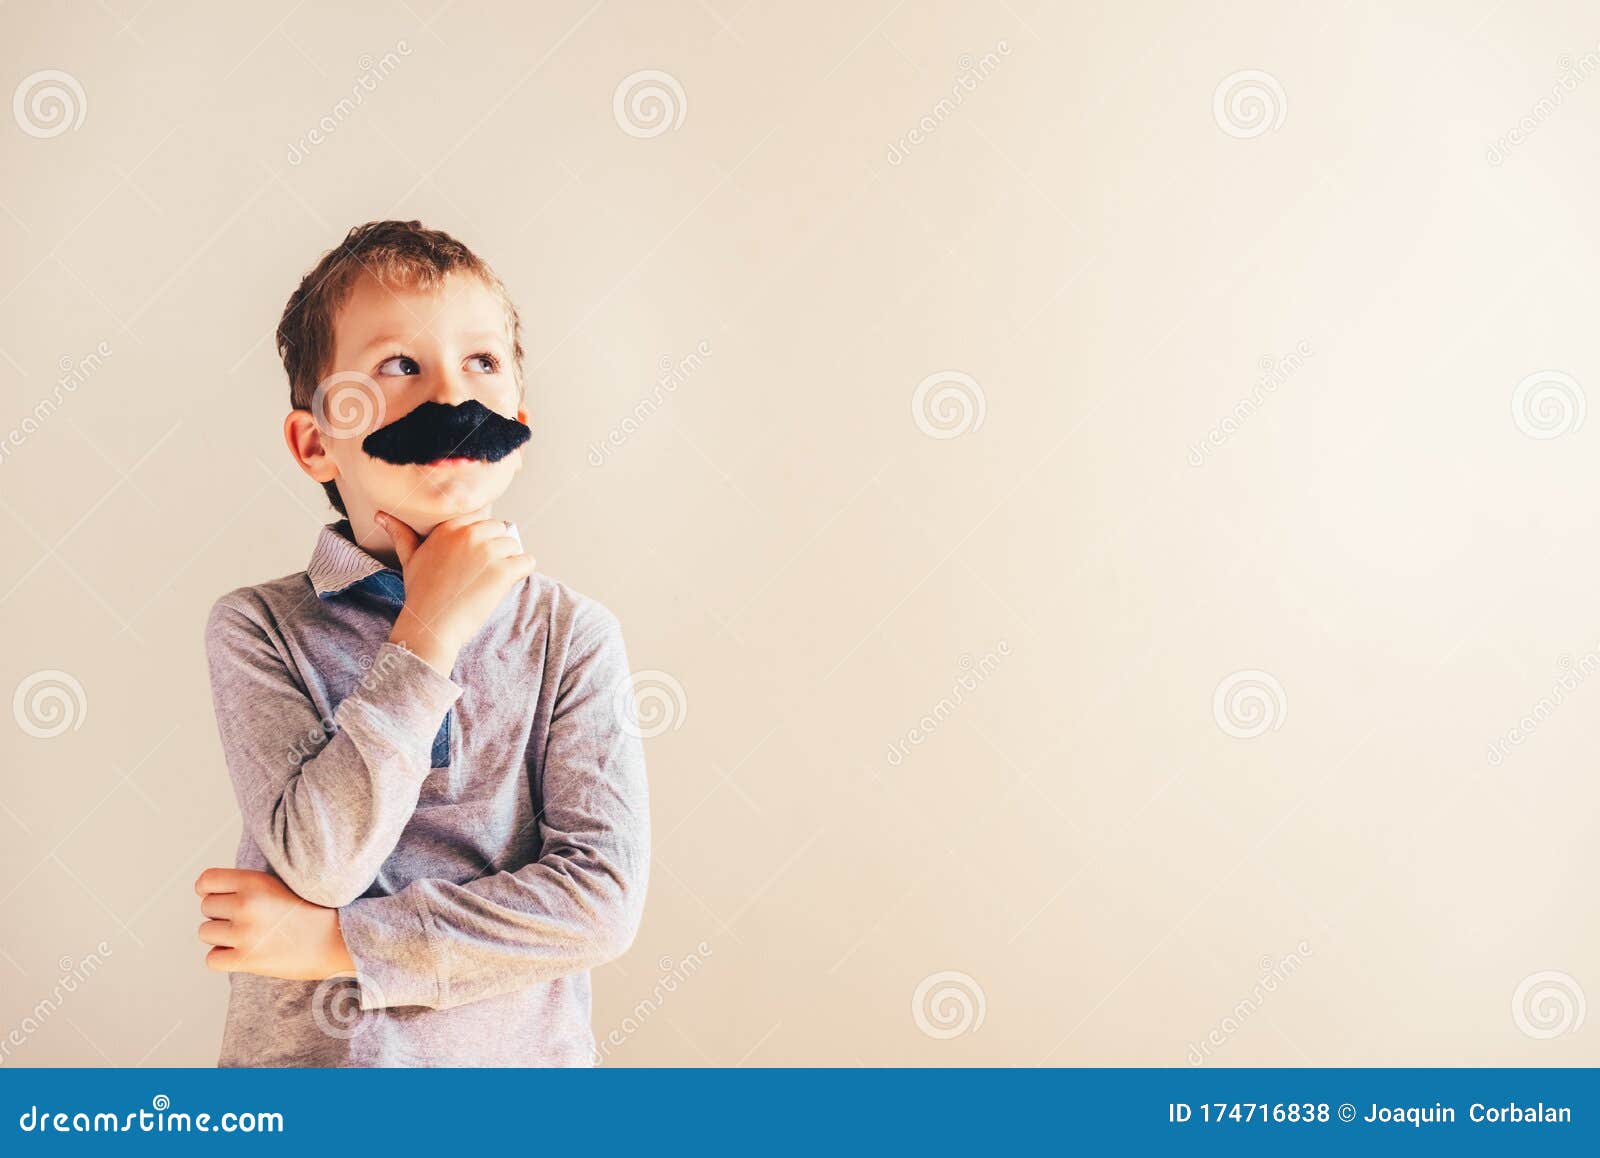 funny child with fake mustache gesturing like an adult man, maturity and business concept